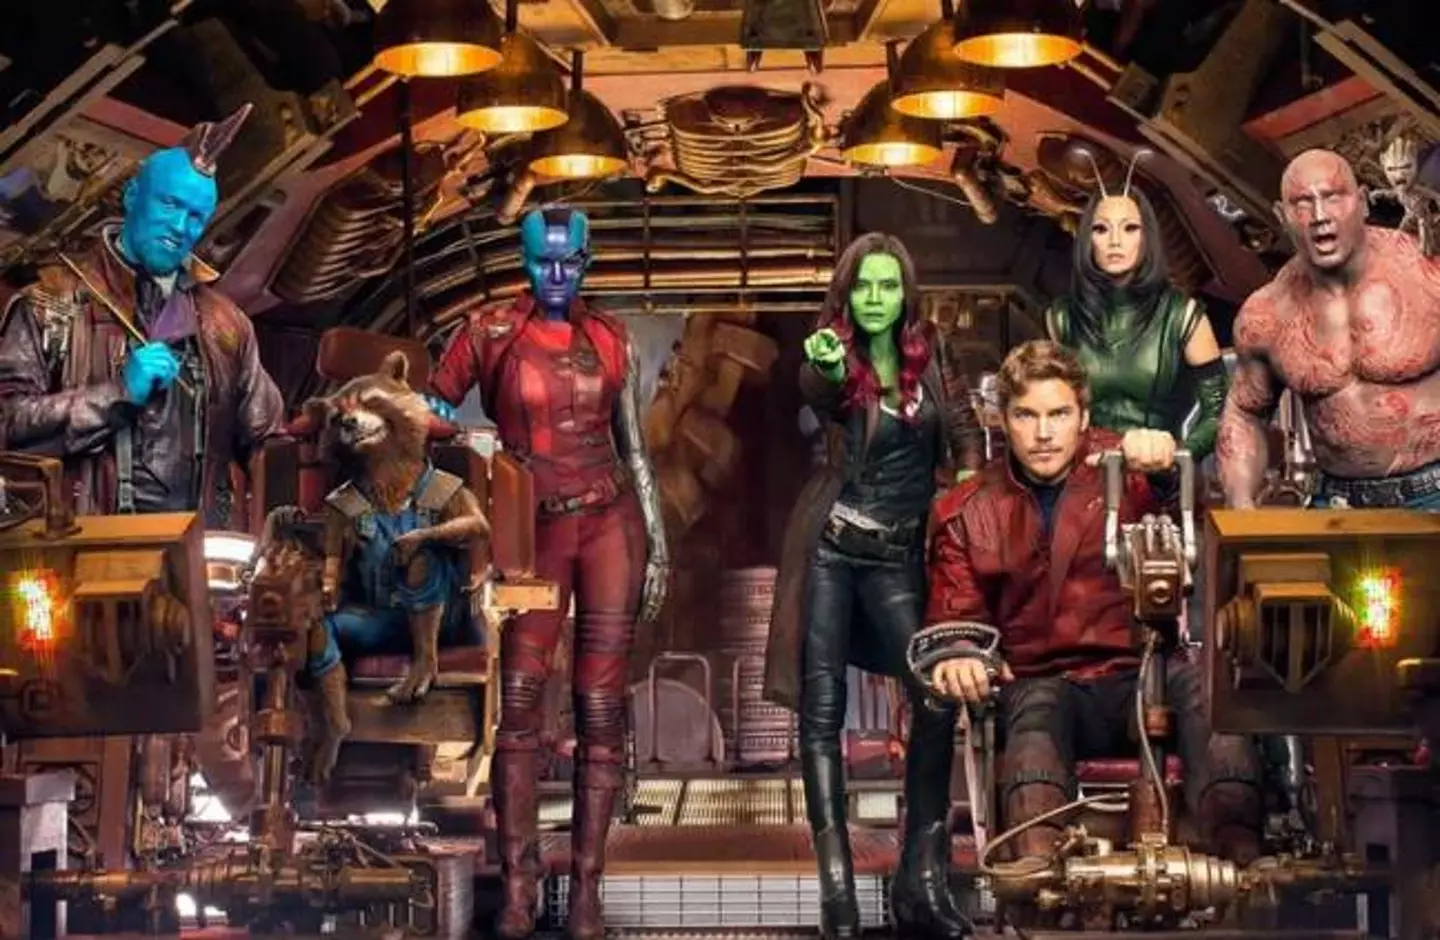 Our favourite intergalactic misfits will be returning to the big screen in 2023.